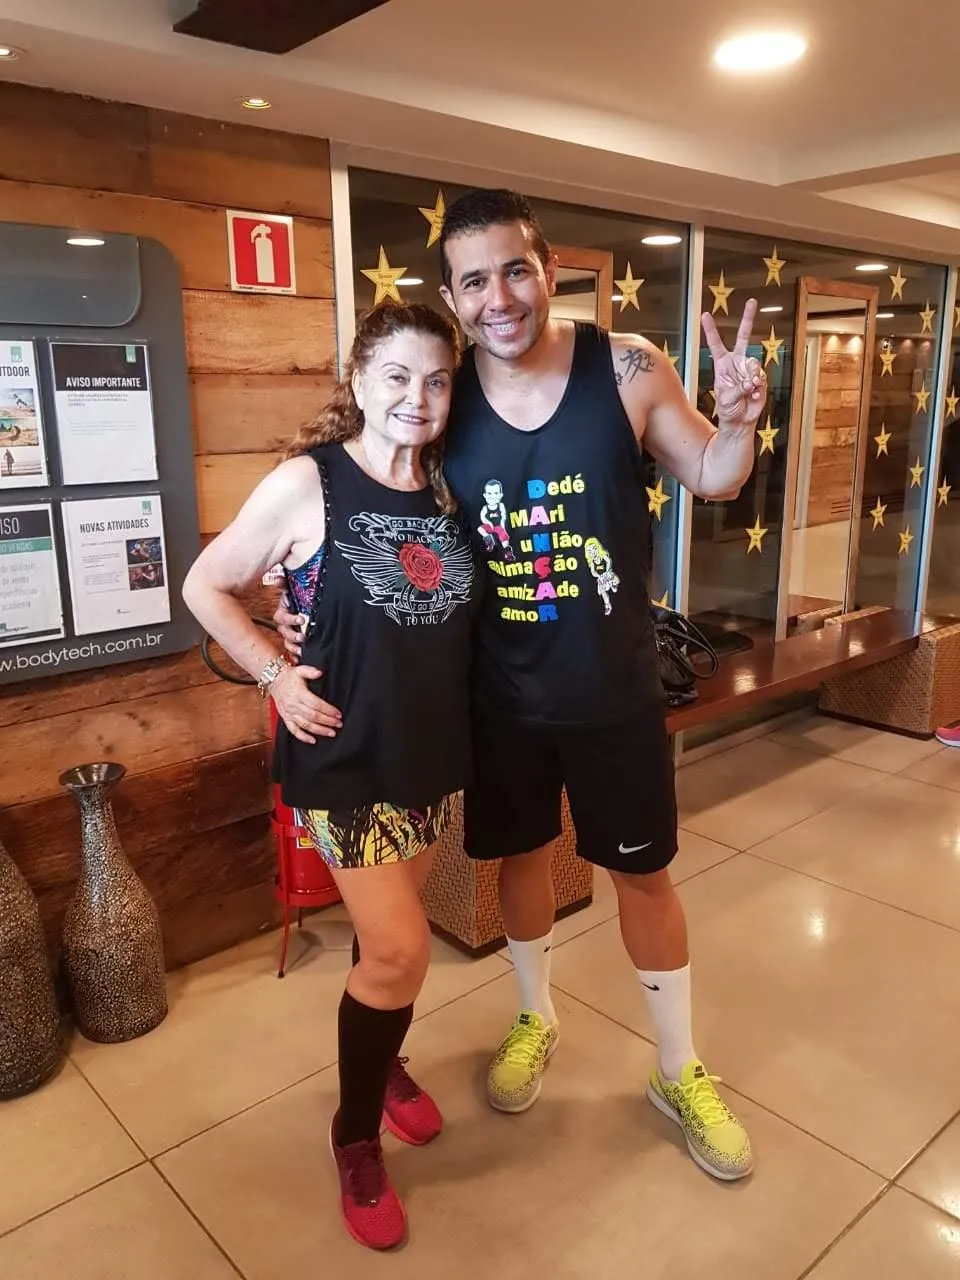 Woman and man smiling together after Brazilian dance fitness class